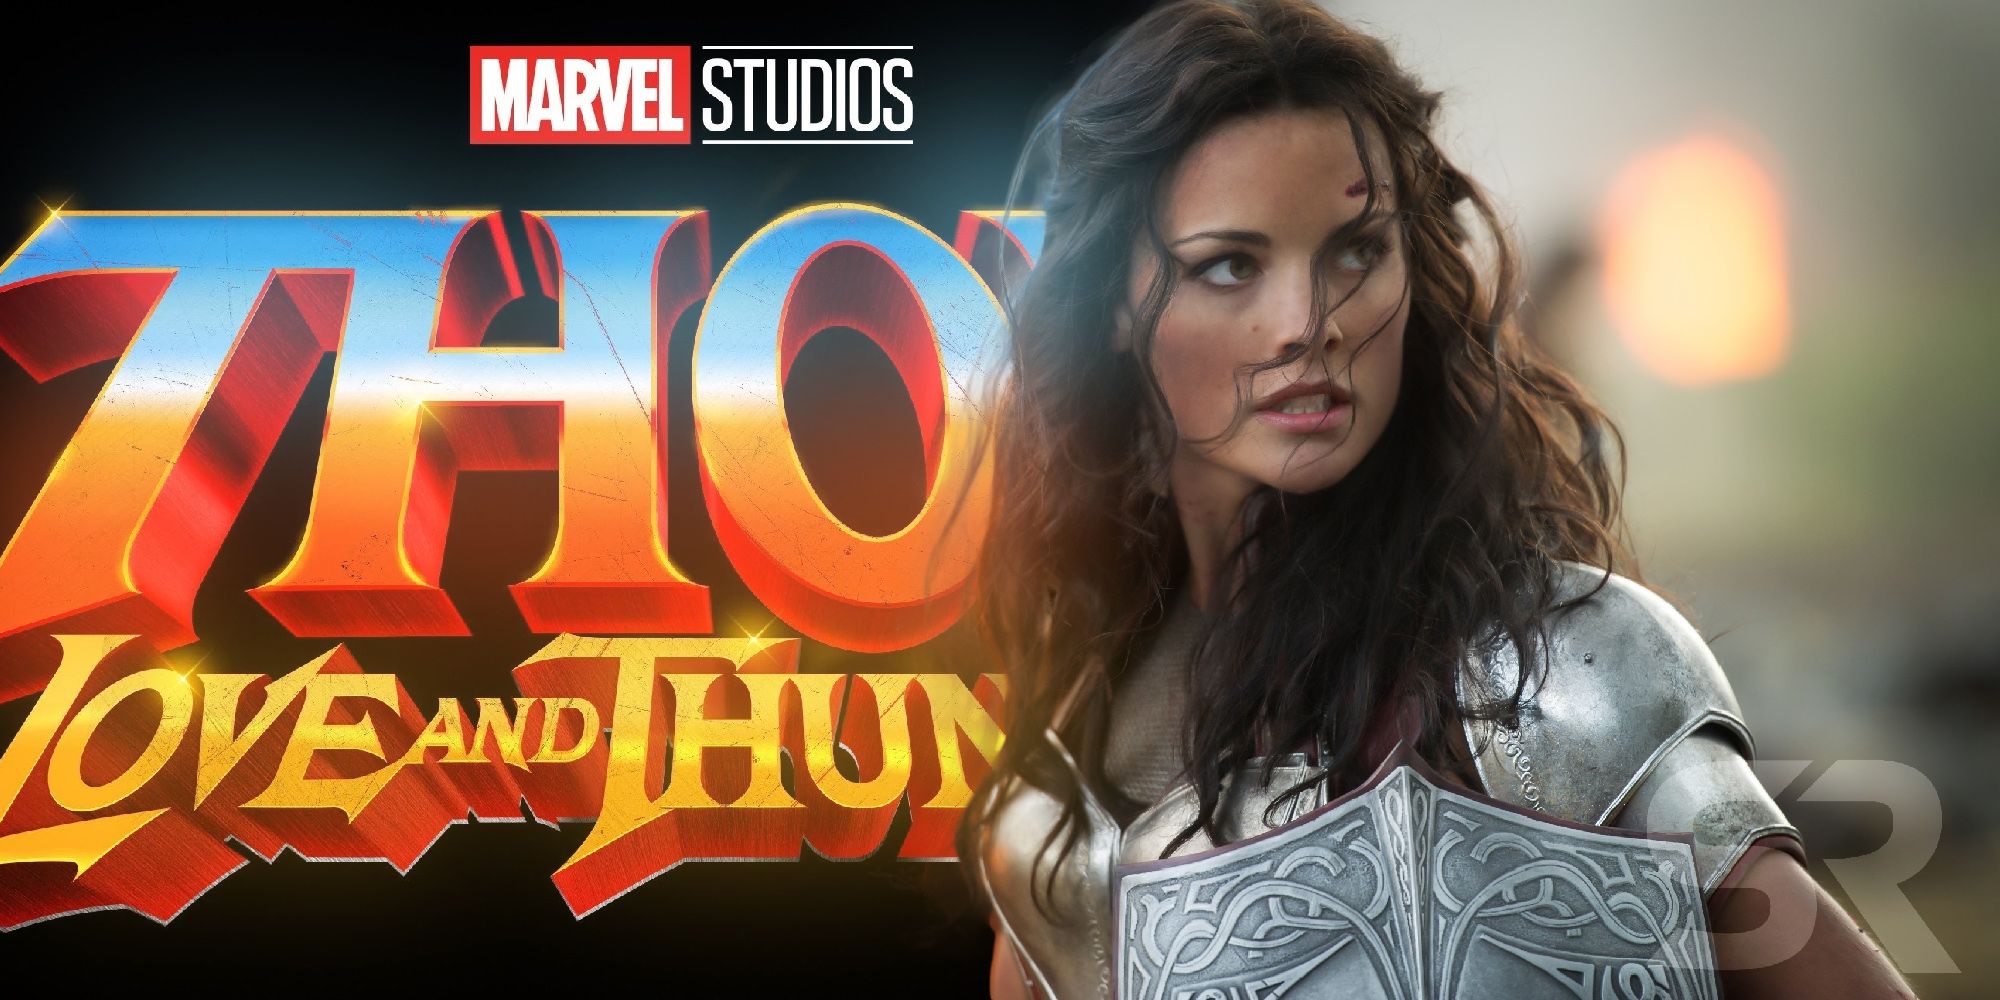 Jaimie Alexander as Lady Sif in Thor: The dark world